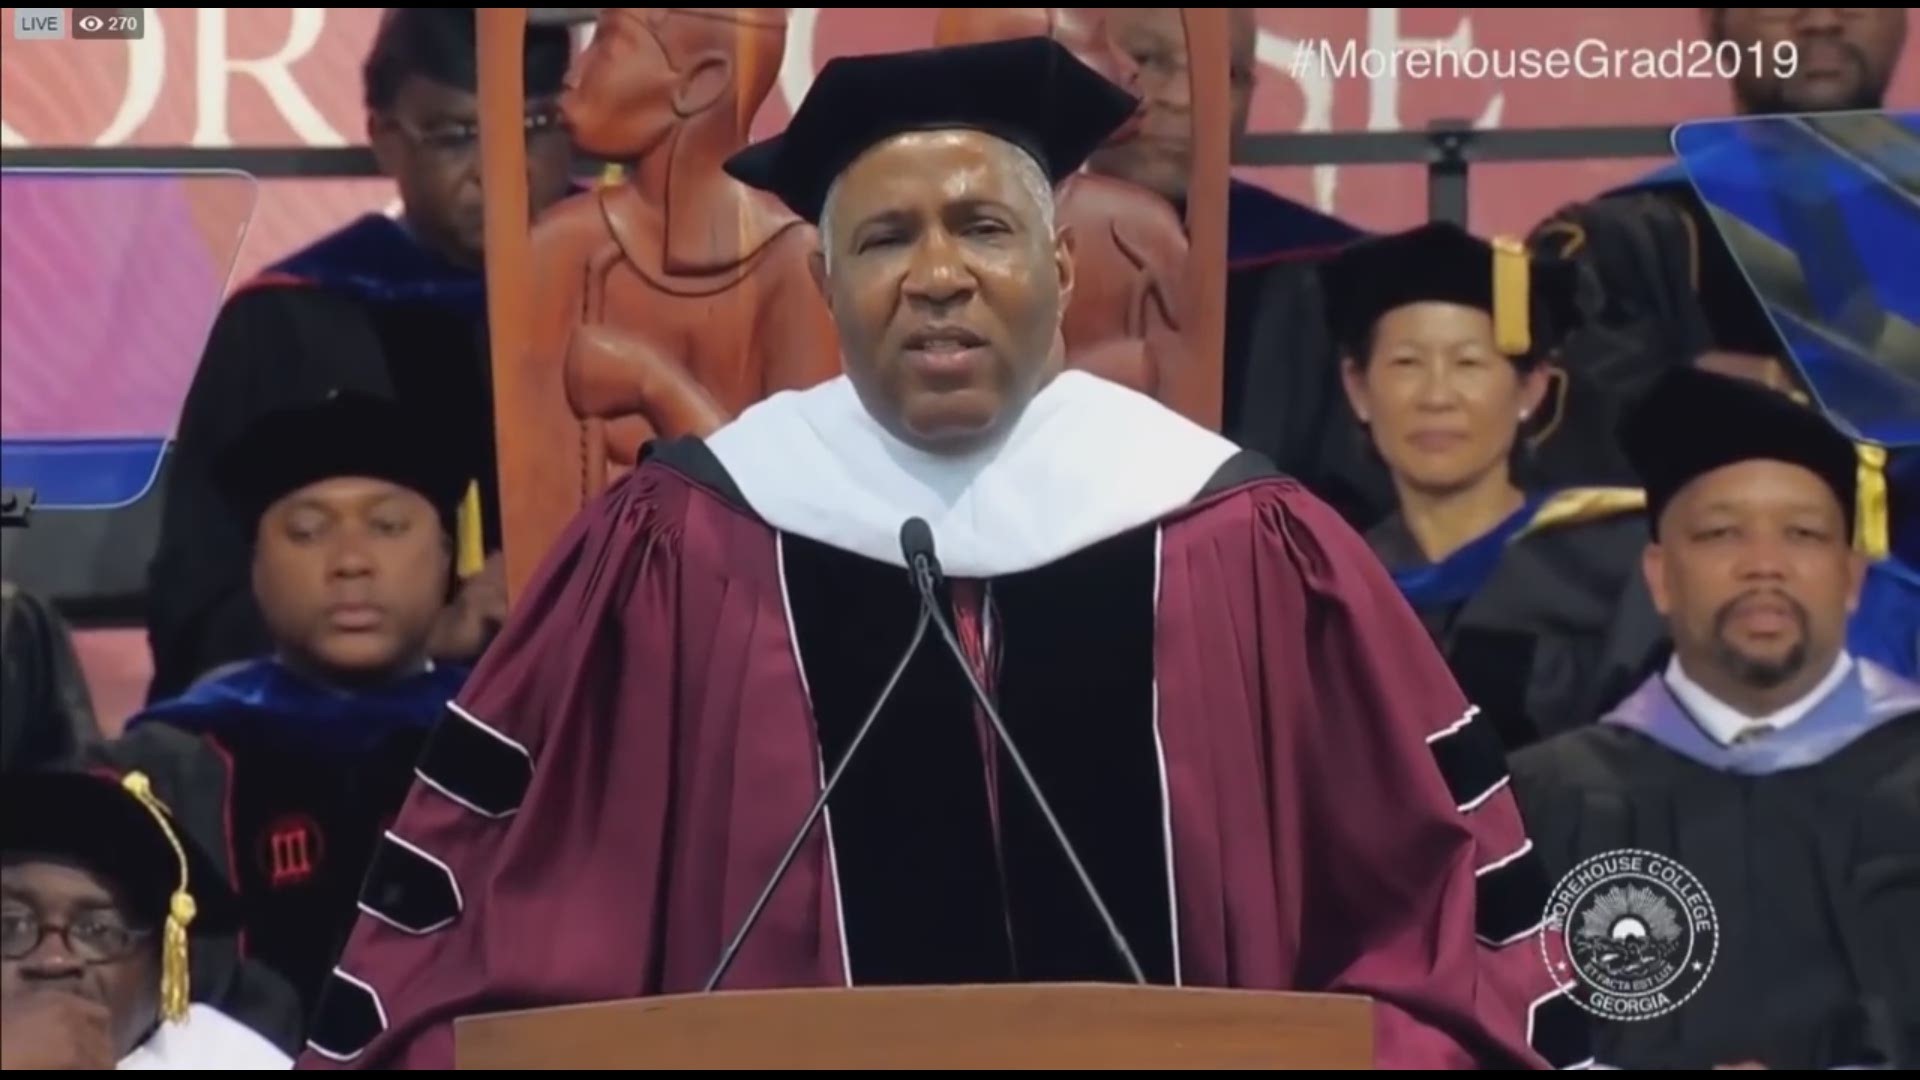 Robert F. Smith, speaking to the graduating class of Morehouse College at commencement services on Sunday, said he will pay off their student loans.